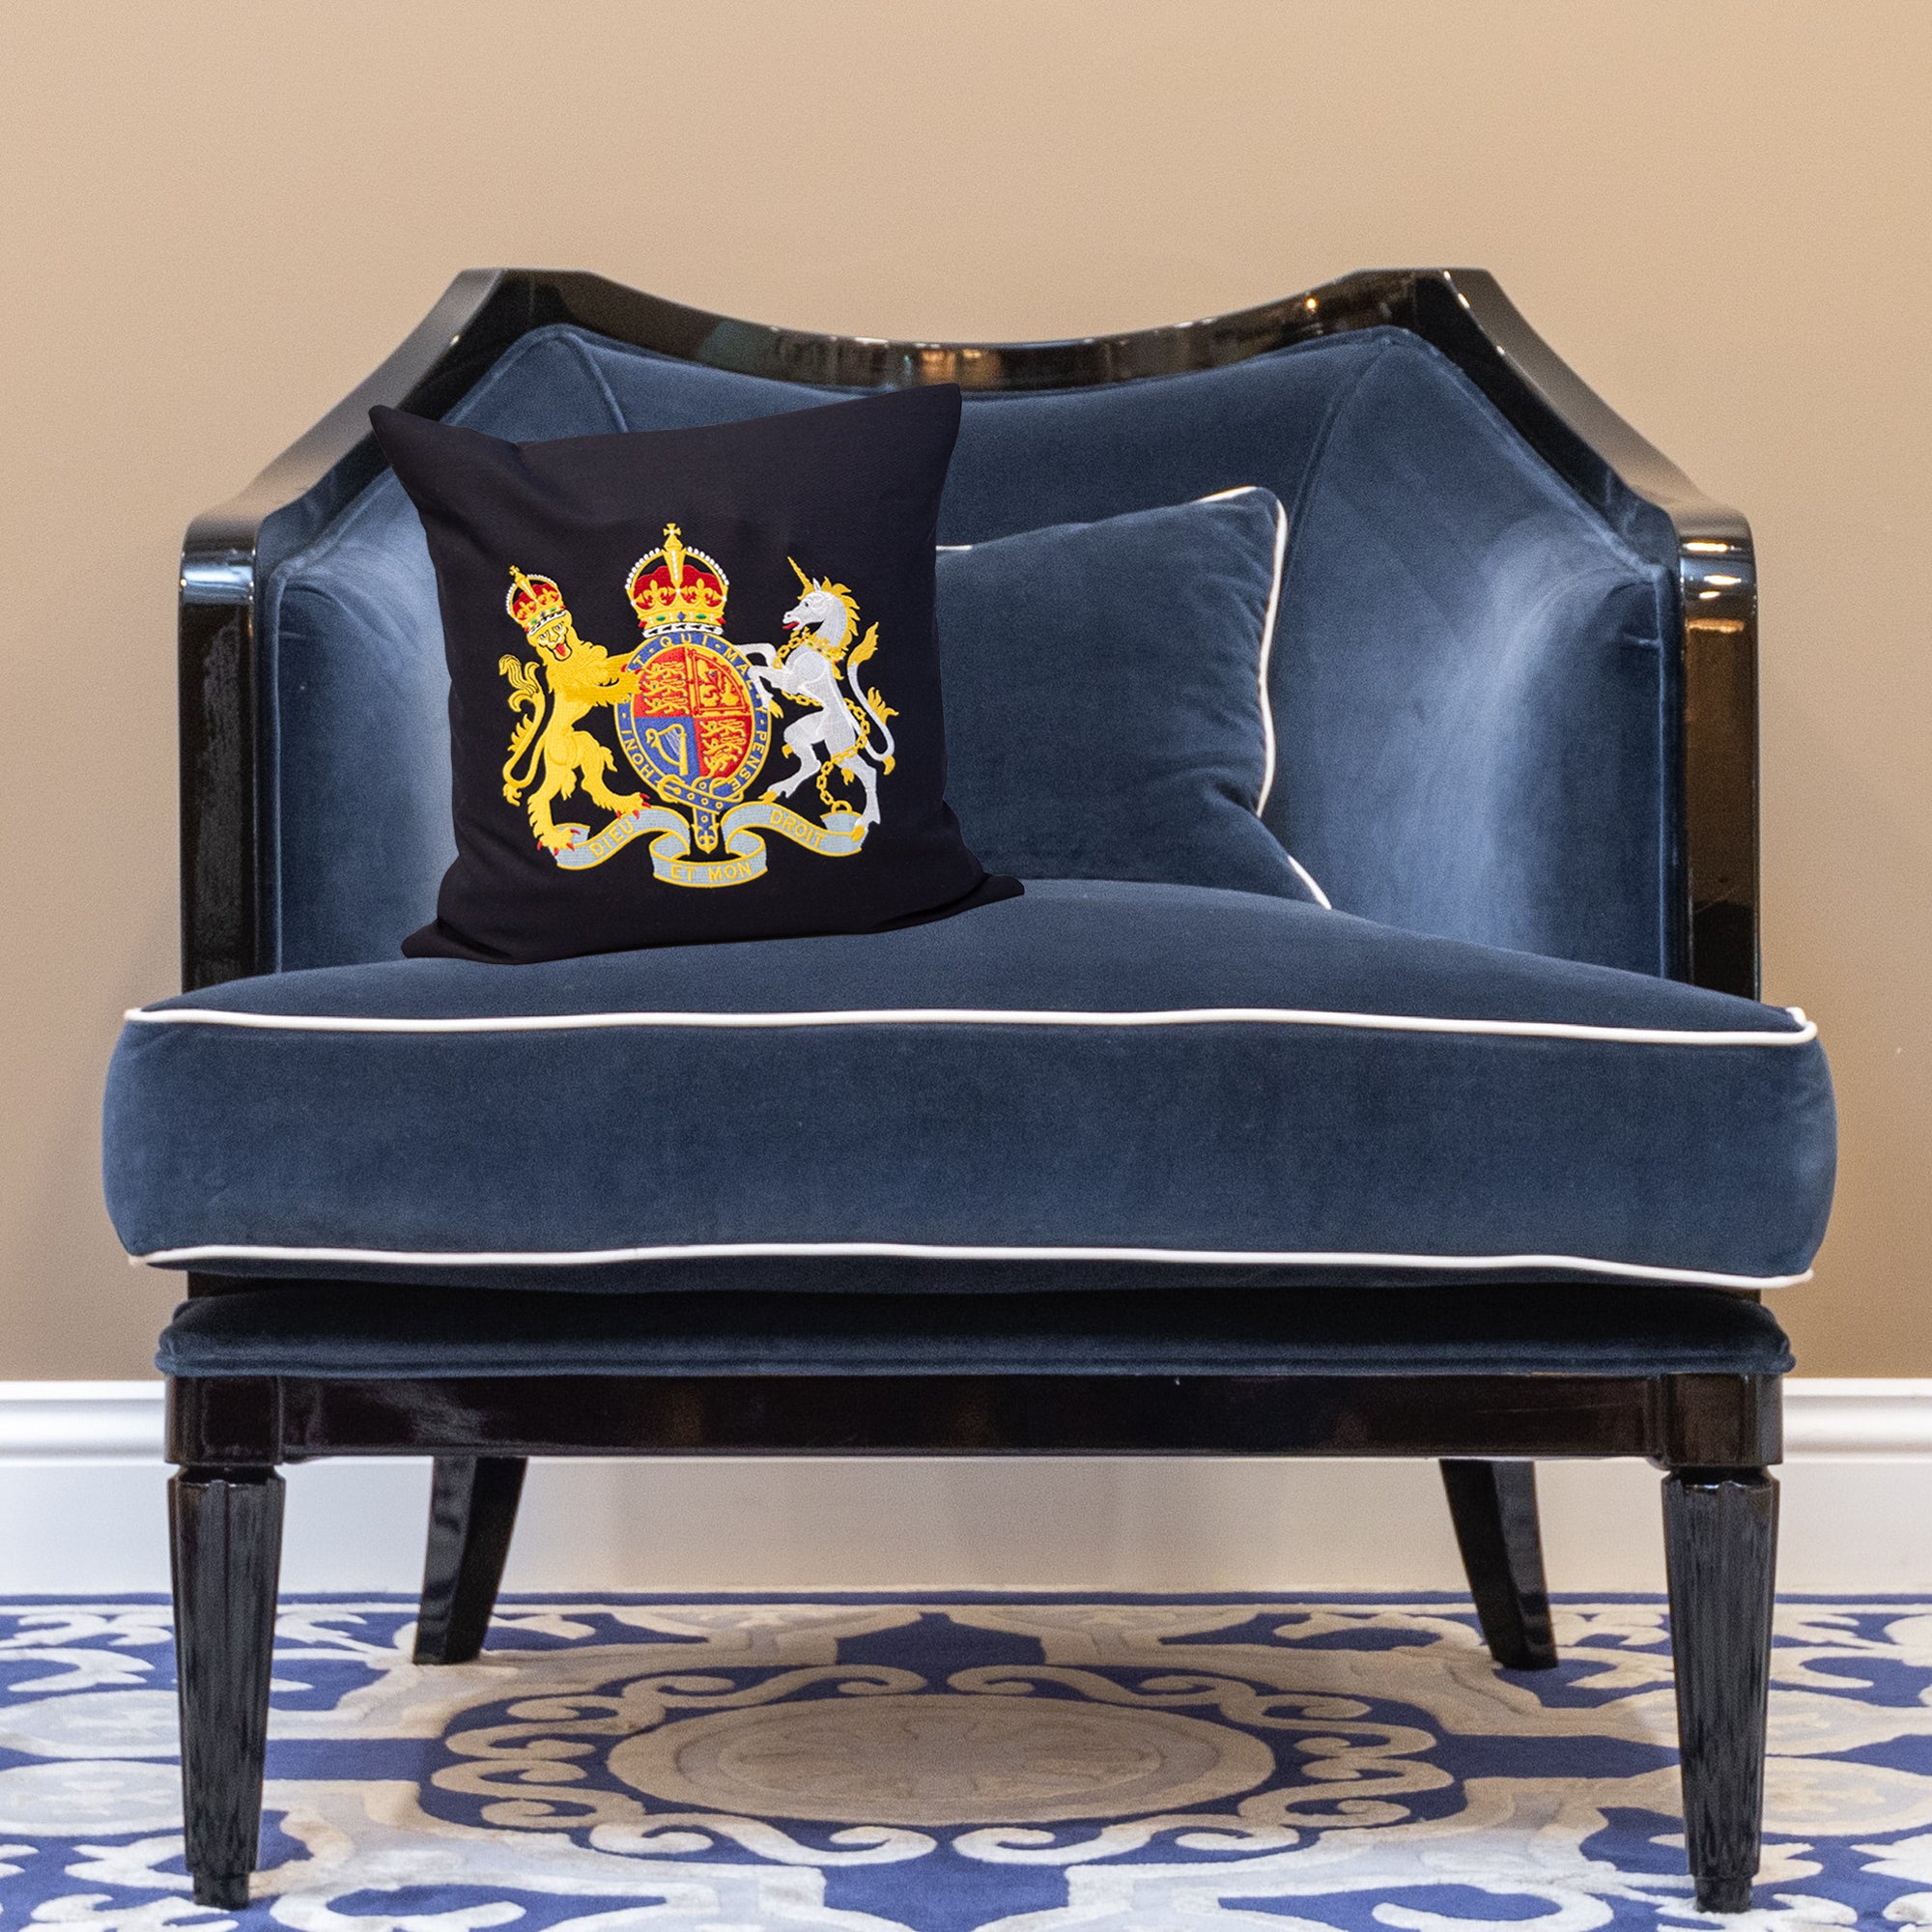 Lieutenancy Coat of Arms with Kings Crown - Machine Embroidered Cushion Cover